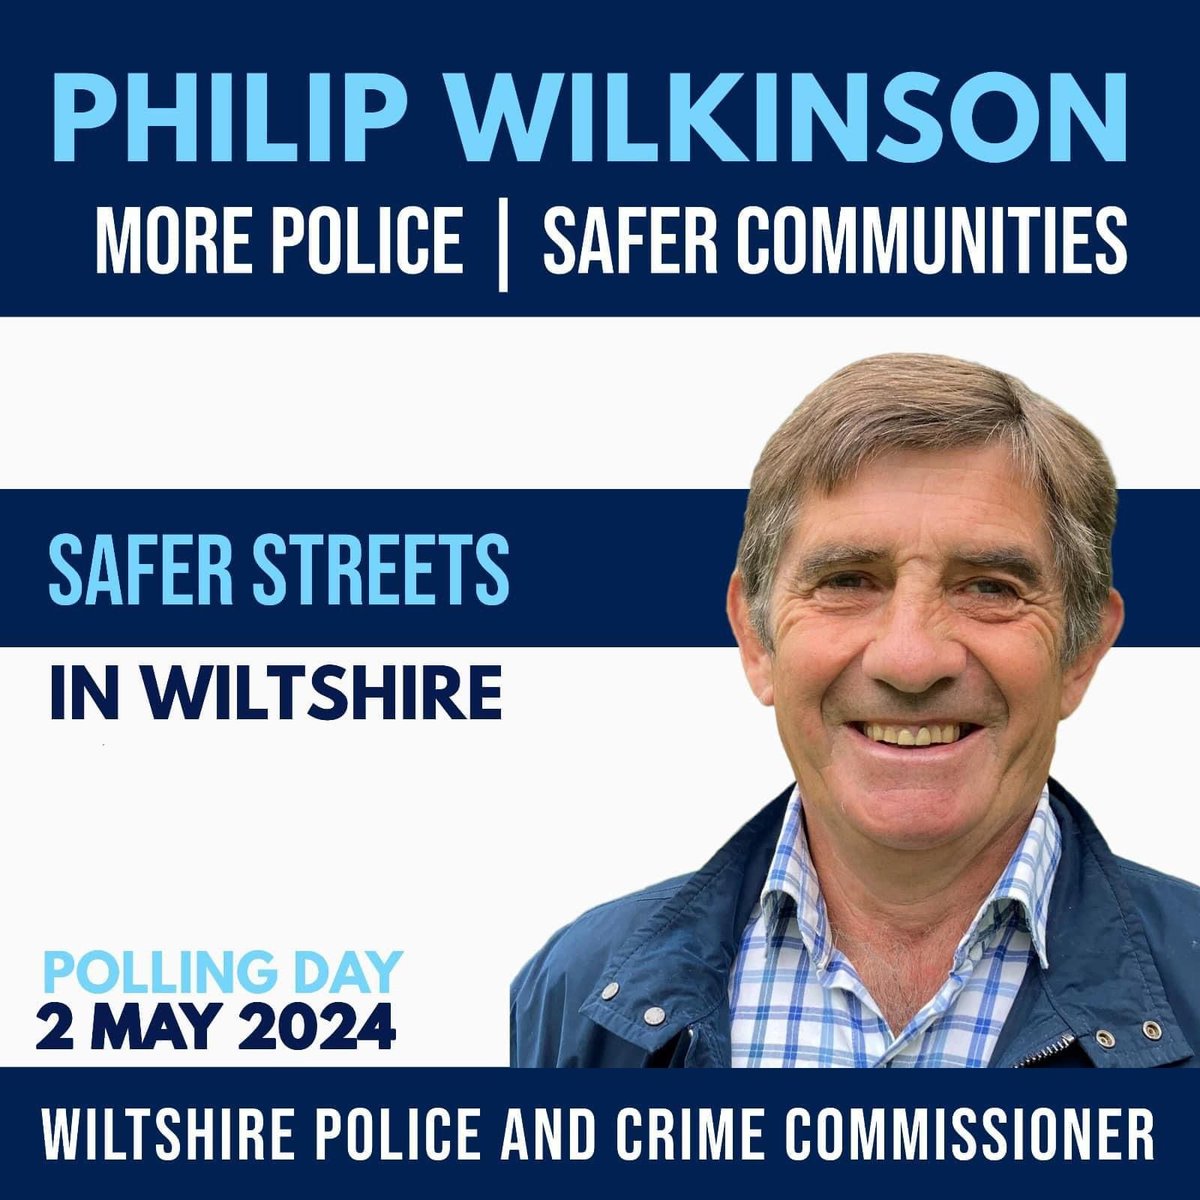 On Thursday 2 May, there is the local election for Wiltshire Police & Crime Commissioner. I'd encourage all who want a safer Wiltshire to vote for Philip Wilkinson who has helped transform our police over the past three years. Please also remember to bring an ID to the Polls.